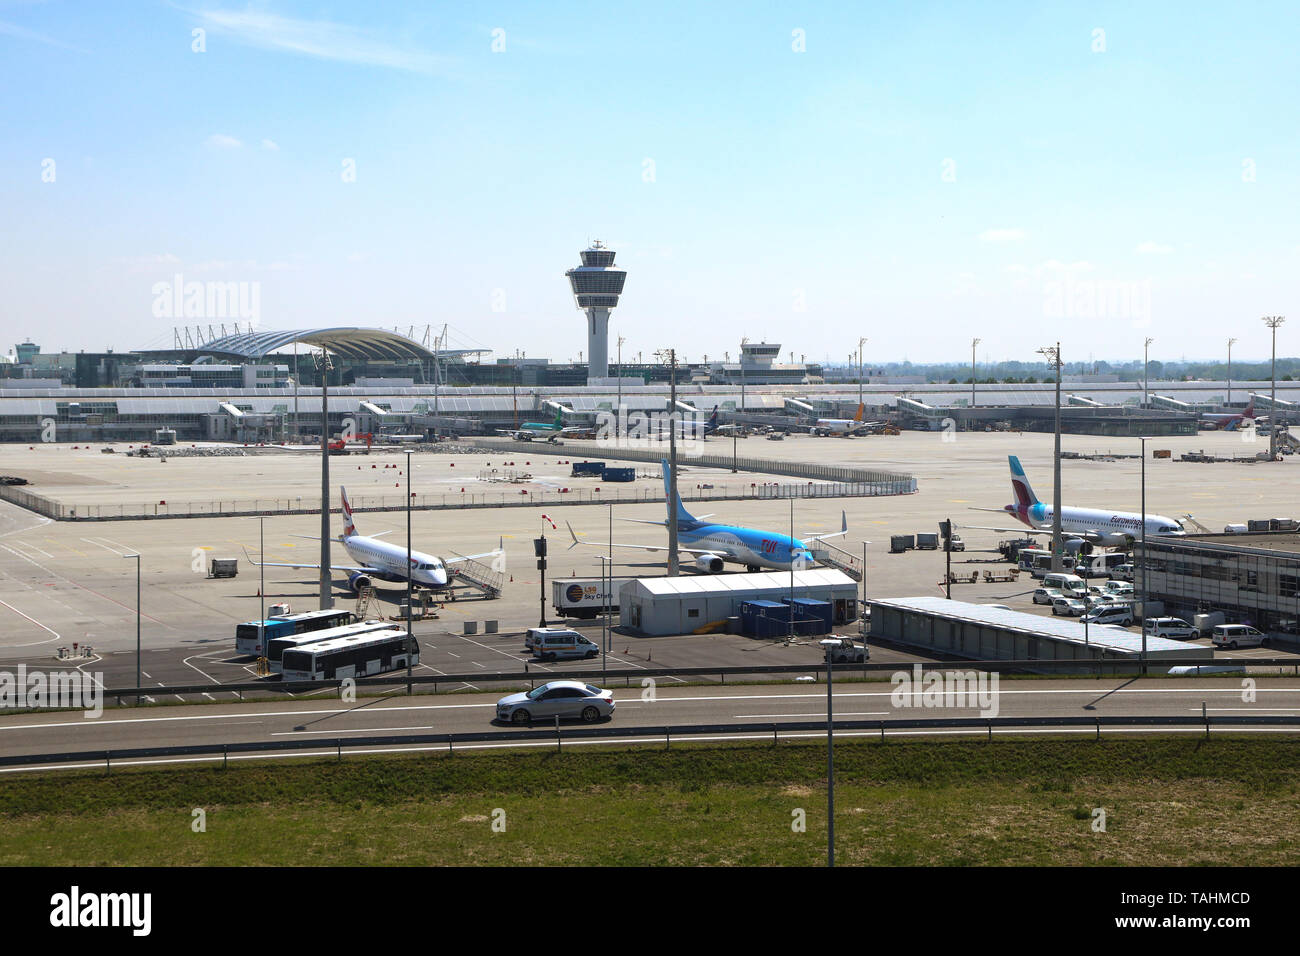 MUNICH, GERMANY - MAY 19, 2019  panoramic view of Munich international airport with the control tower and the runways to refuel the aircrafts Stock Photo